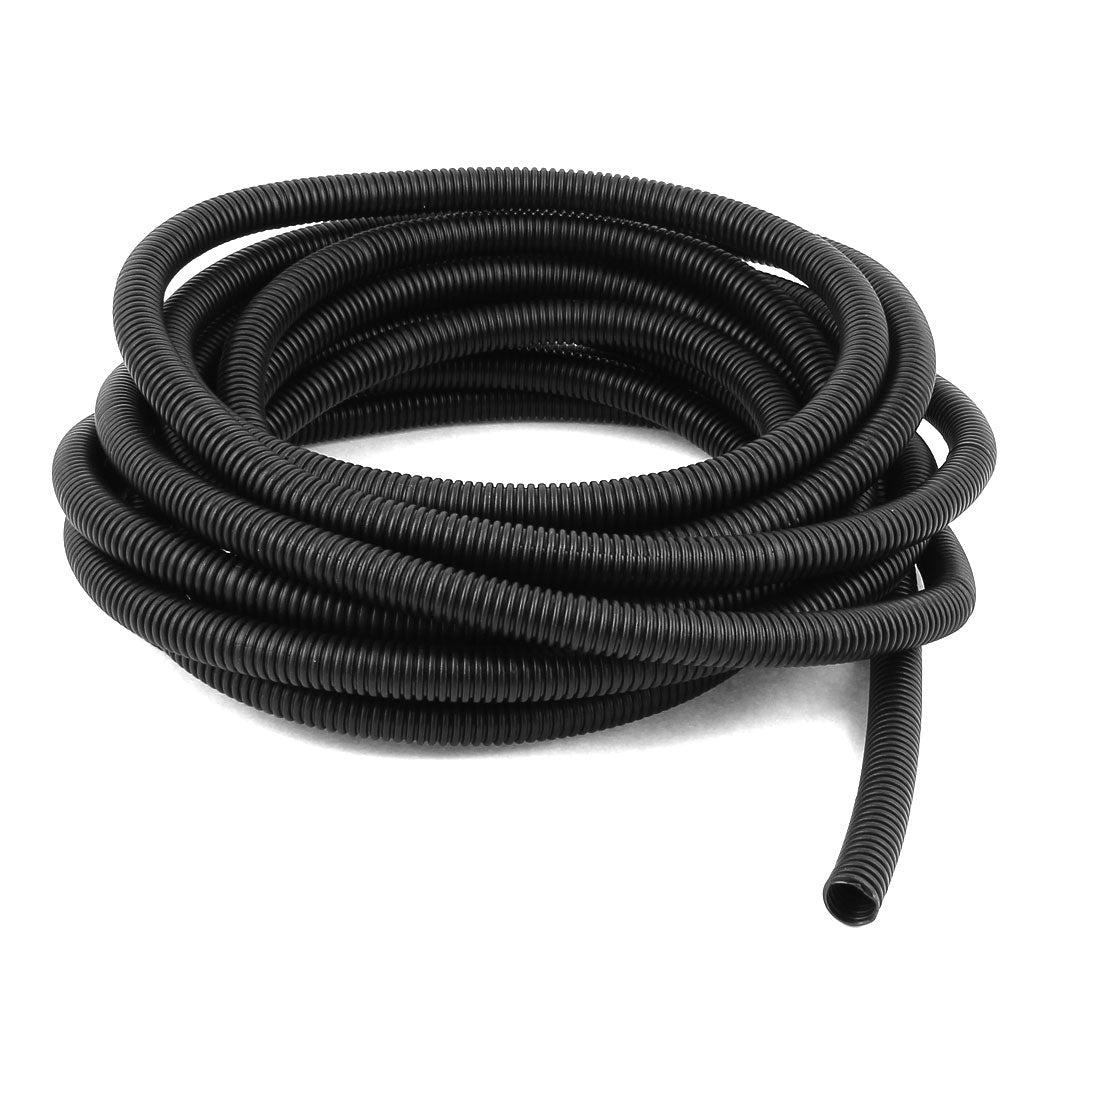 uxcell Uxcell 6 M 10 x 13 mm Plastic Flexible Corrugated Conduit Tube for Garden,Office Black